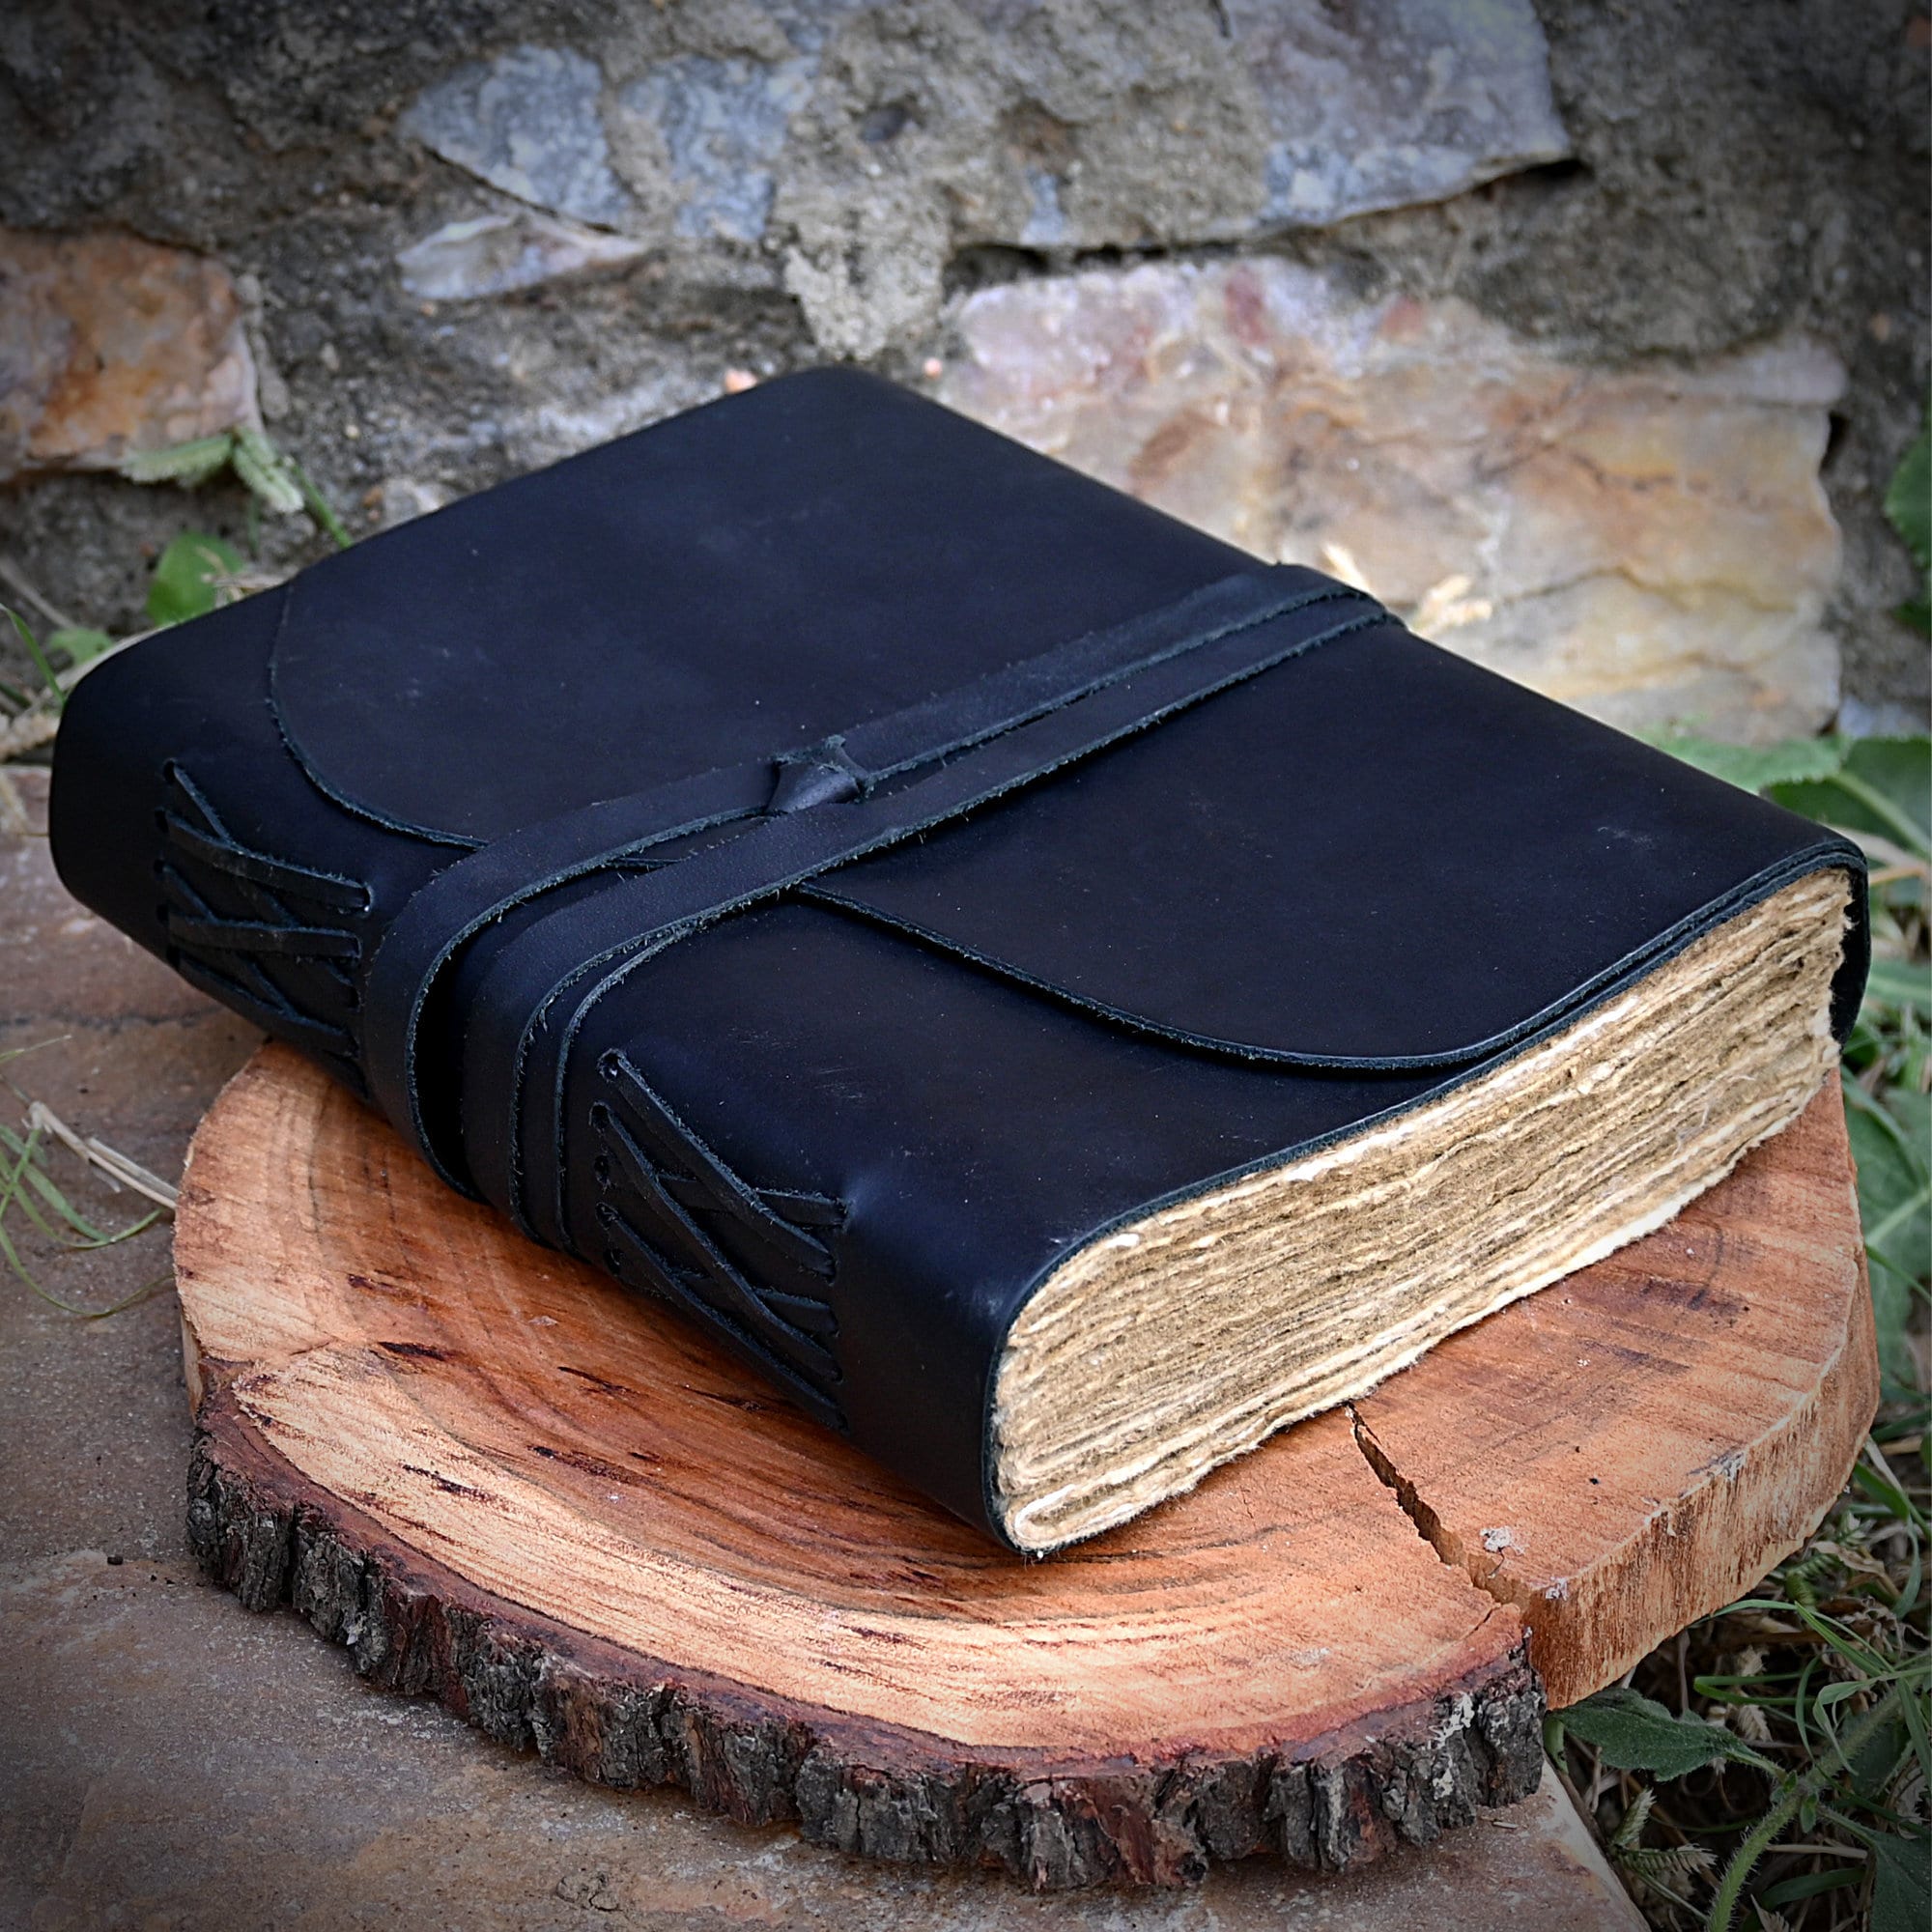 An Open Leather Bound Black Journal Outdoors On Table, Revealing